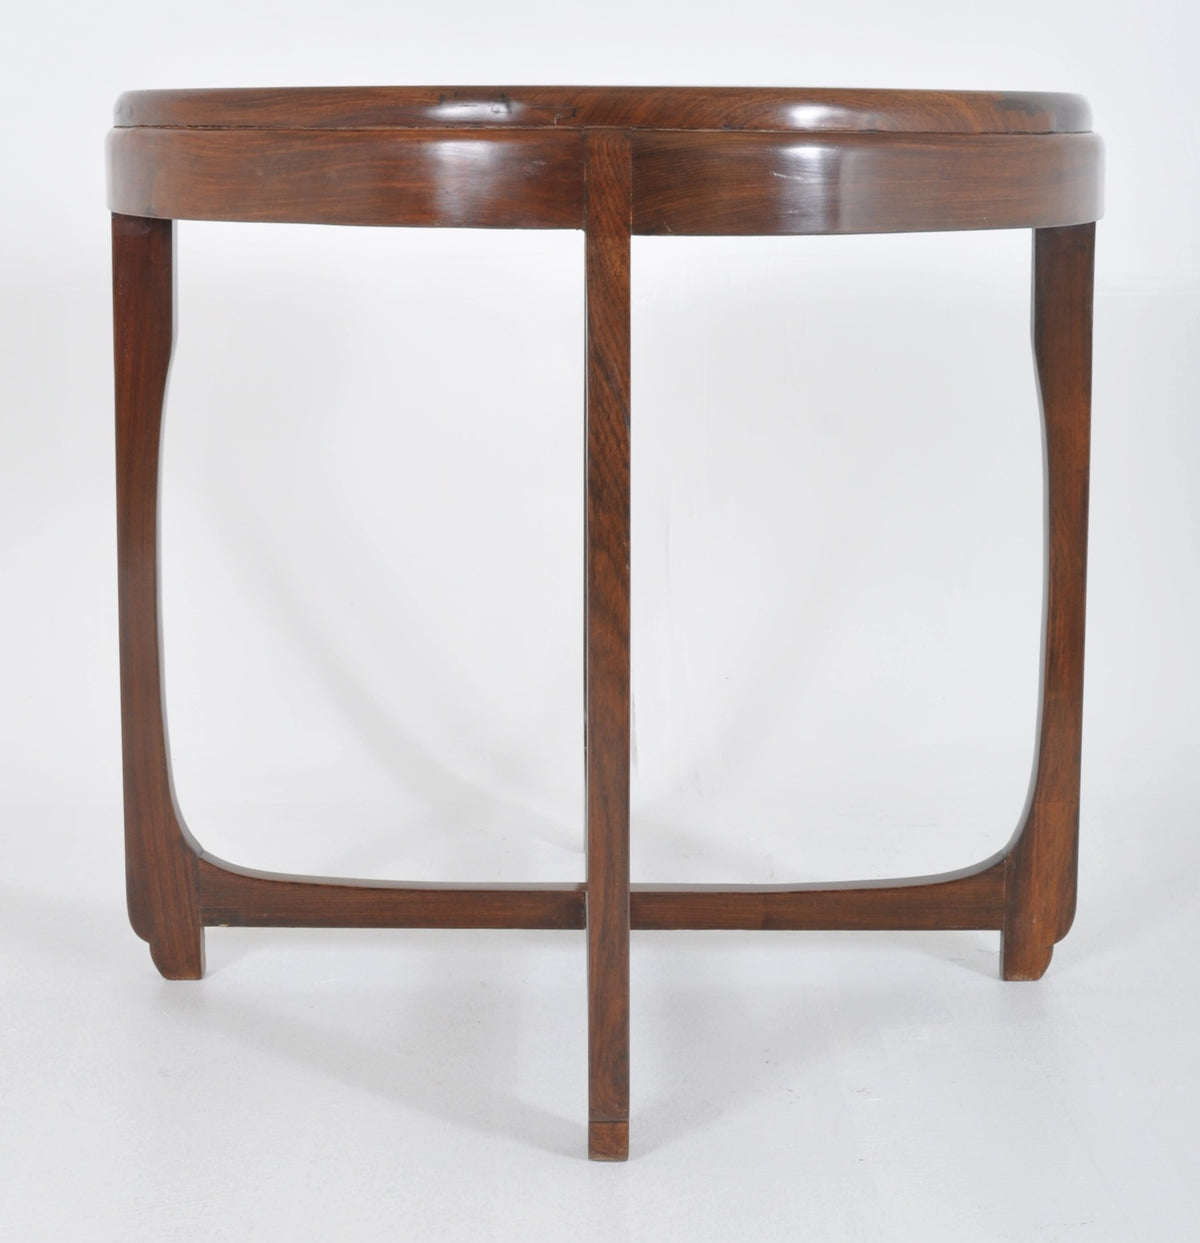 Antique Chinese Art Deco Rosewood & Marble Table Set, Circa 1925